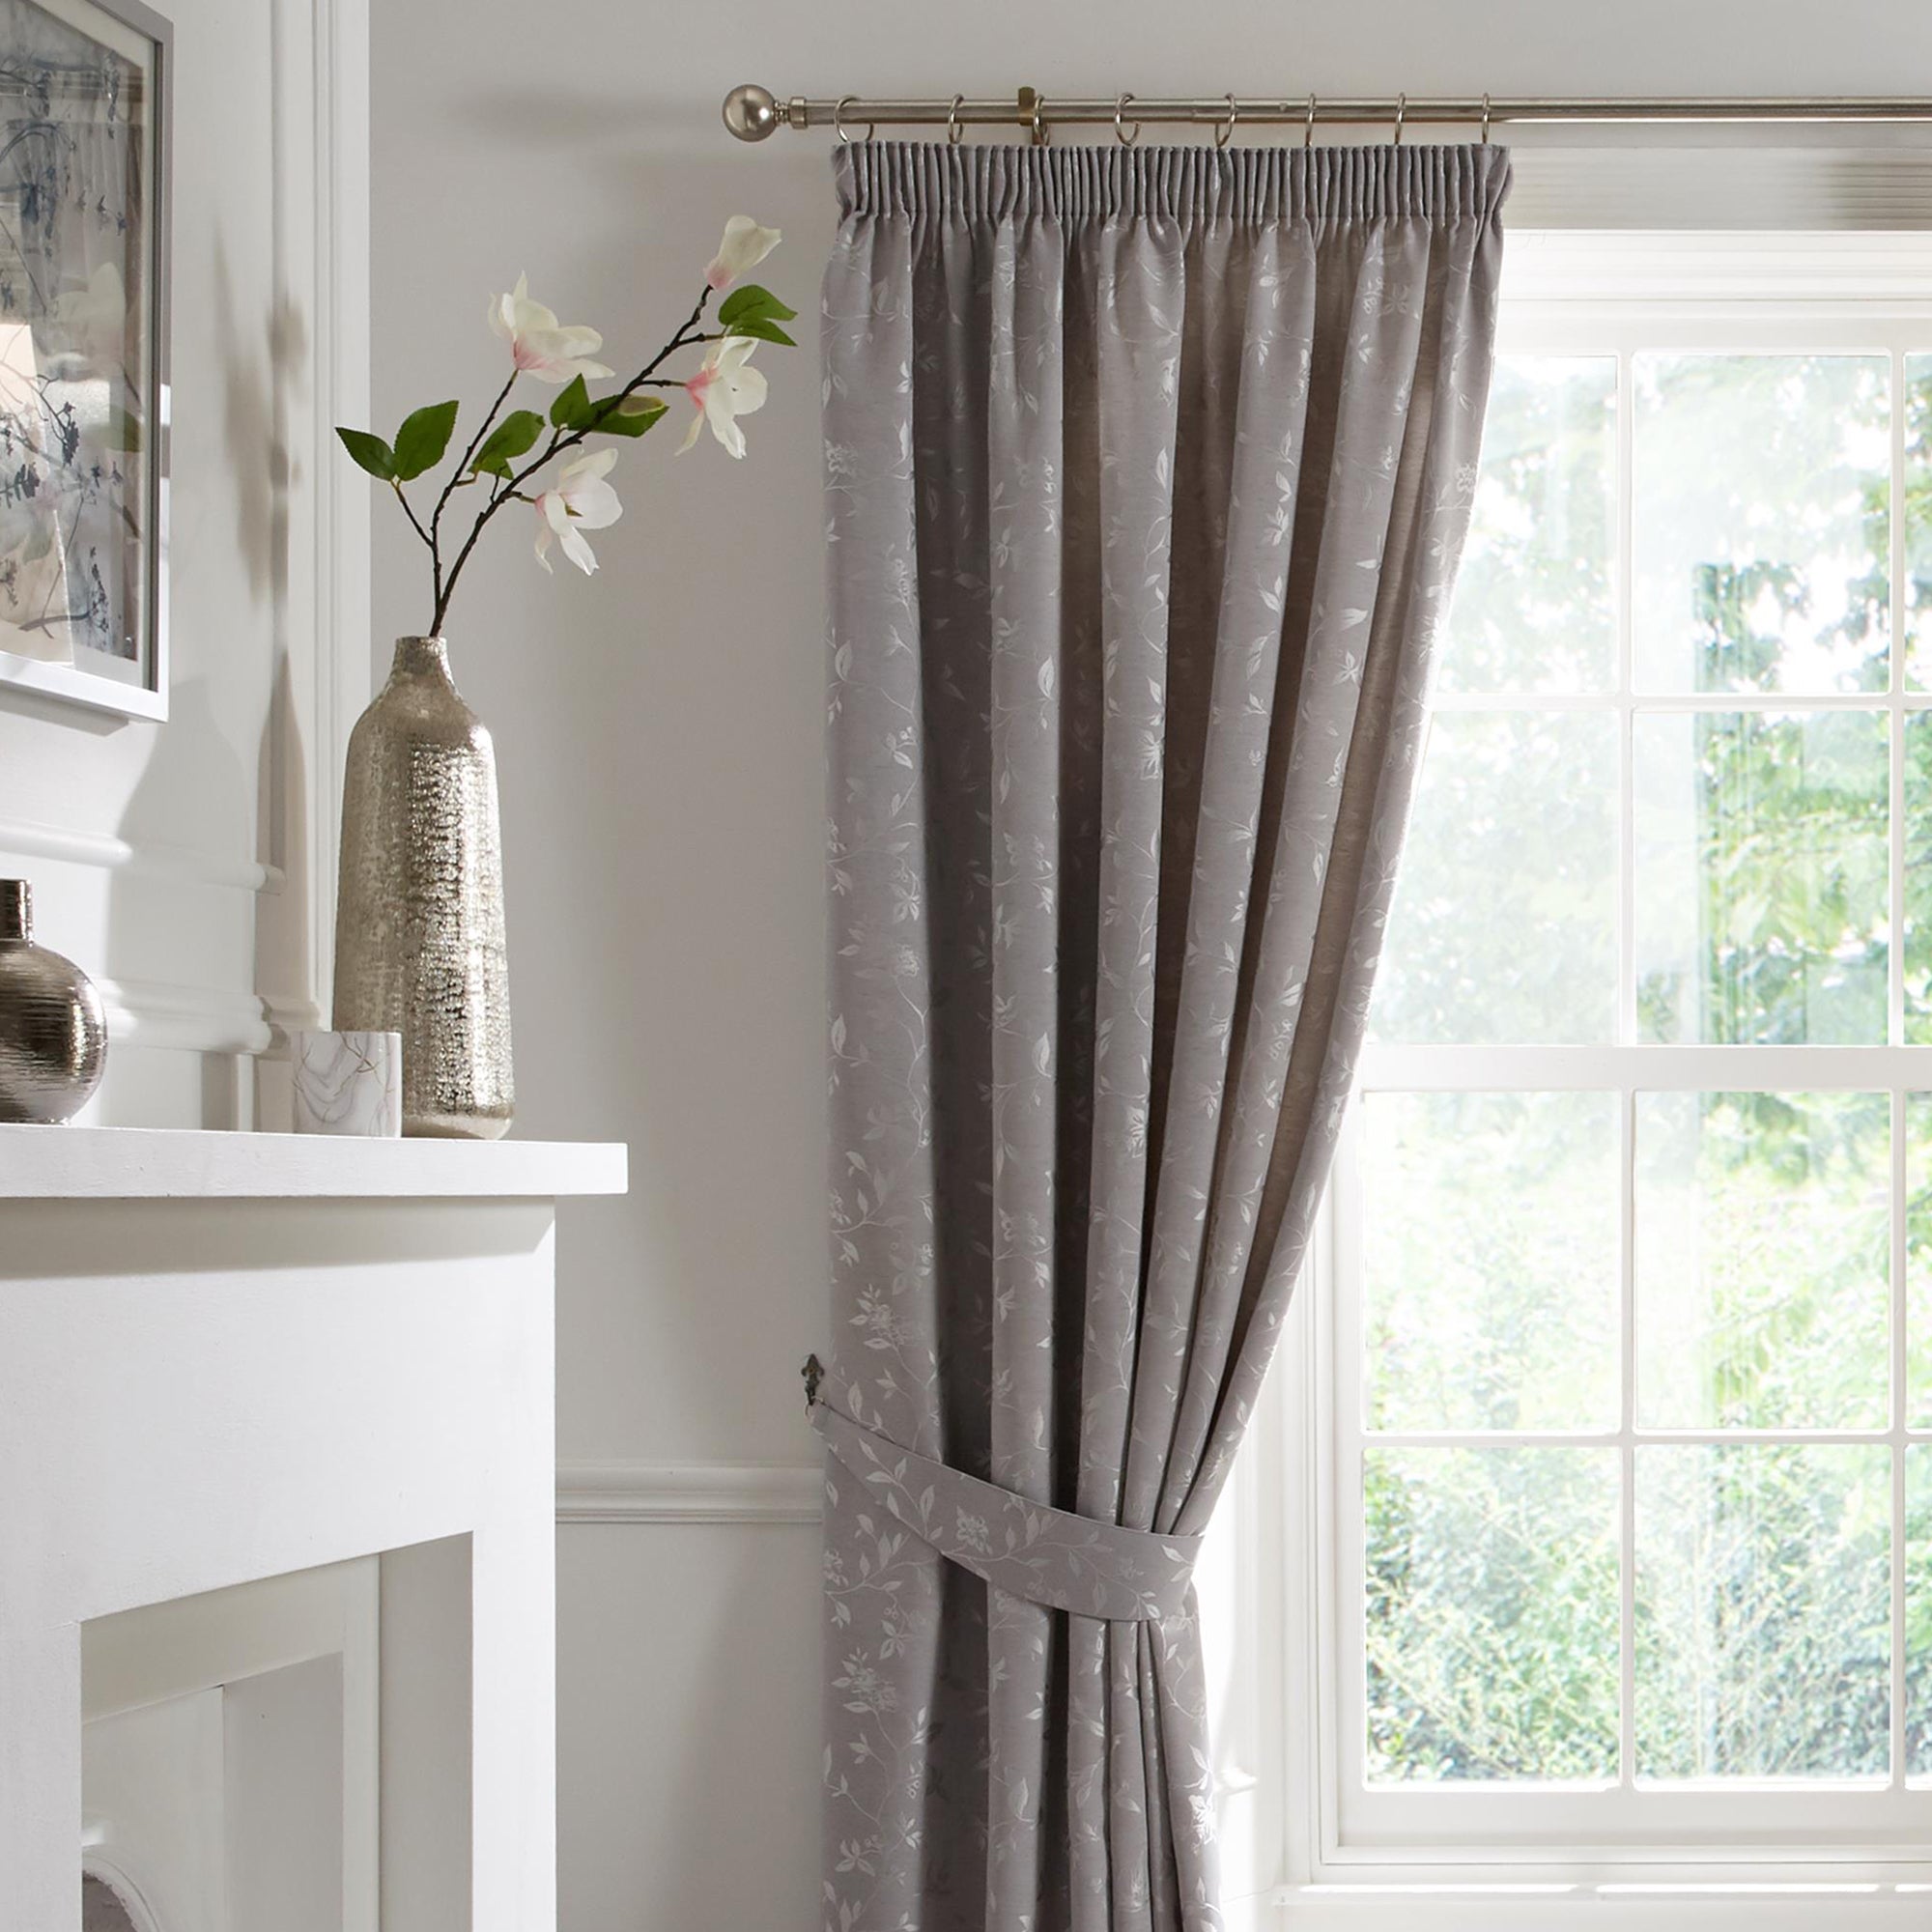 Bird Trail - Jacquard Pair of Pencil Pleat Curtains in Grey - By Curtina